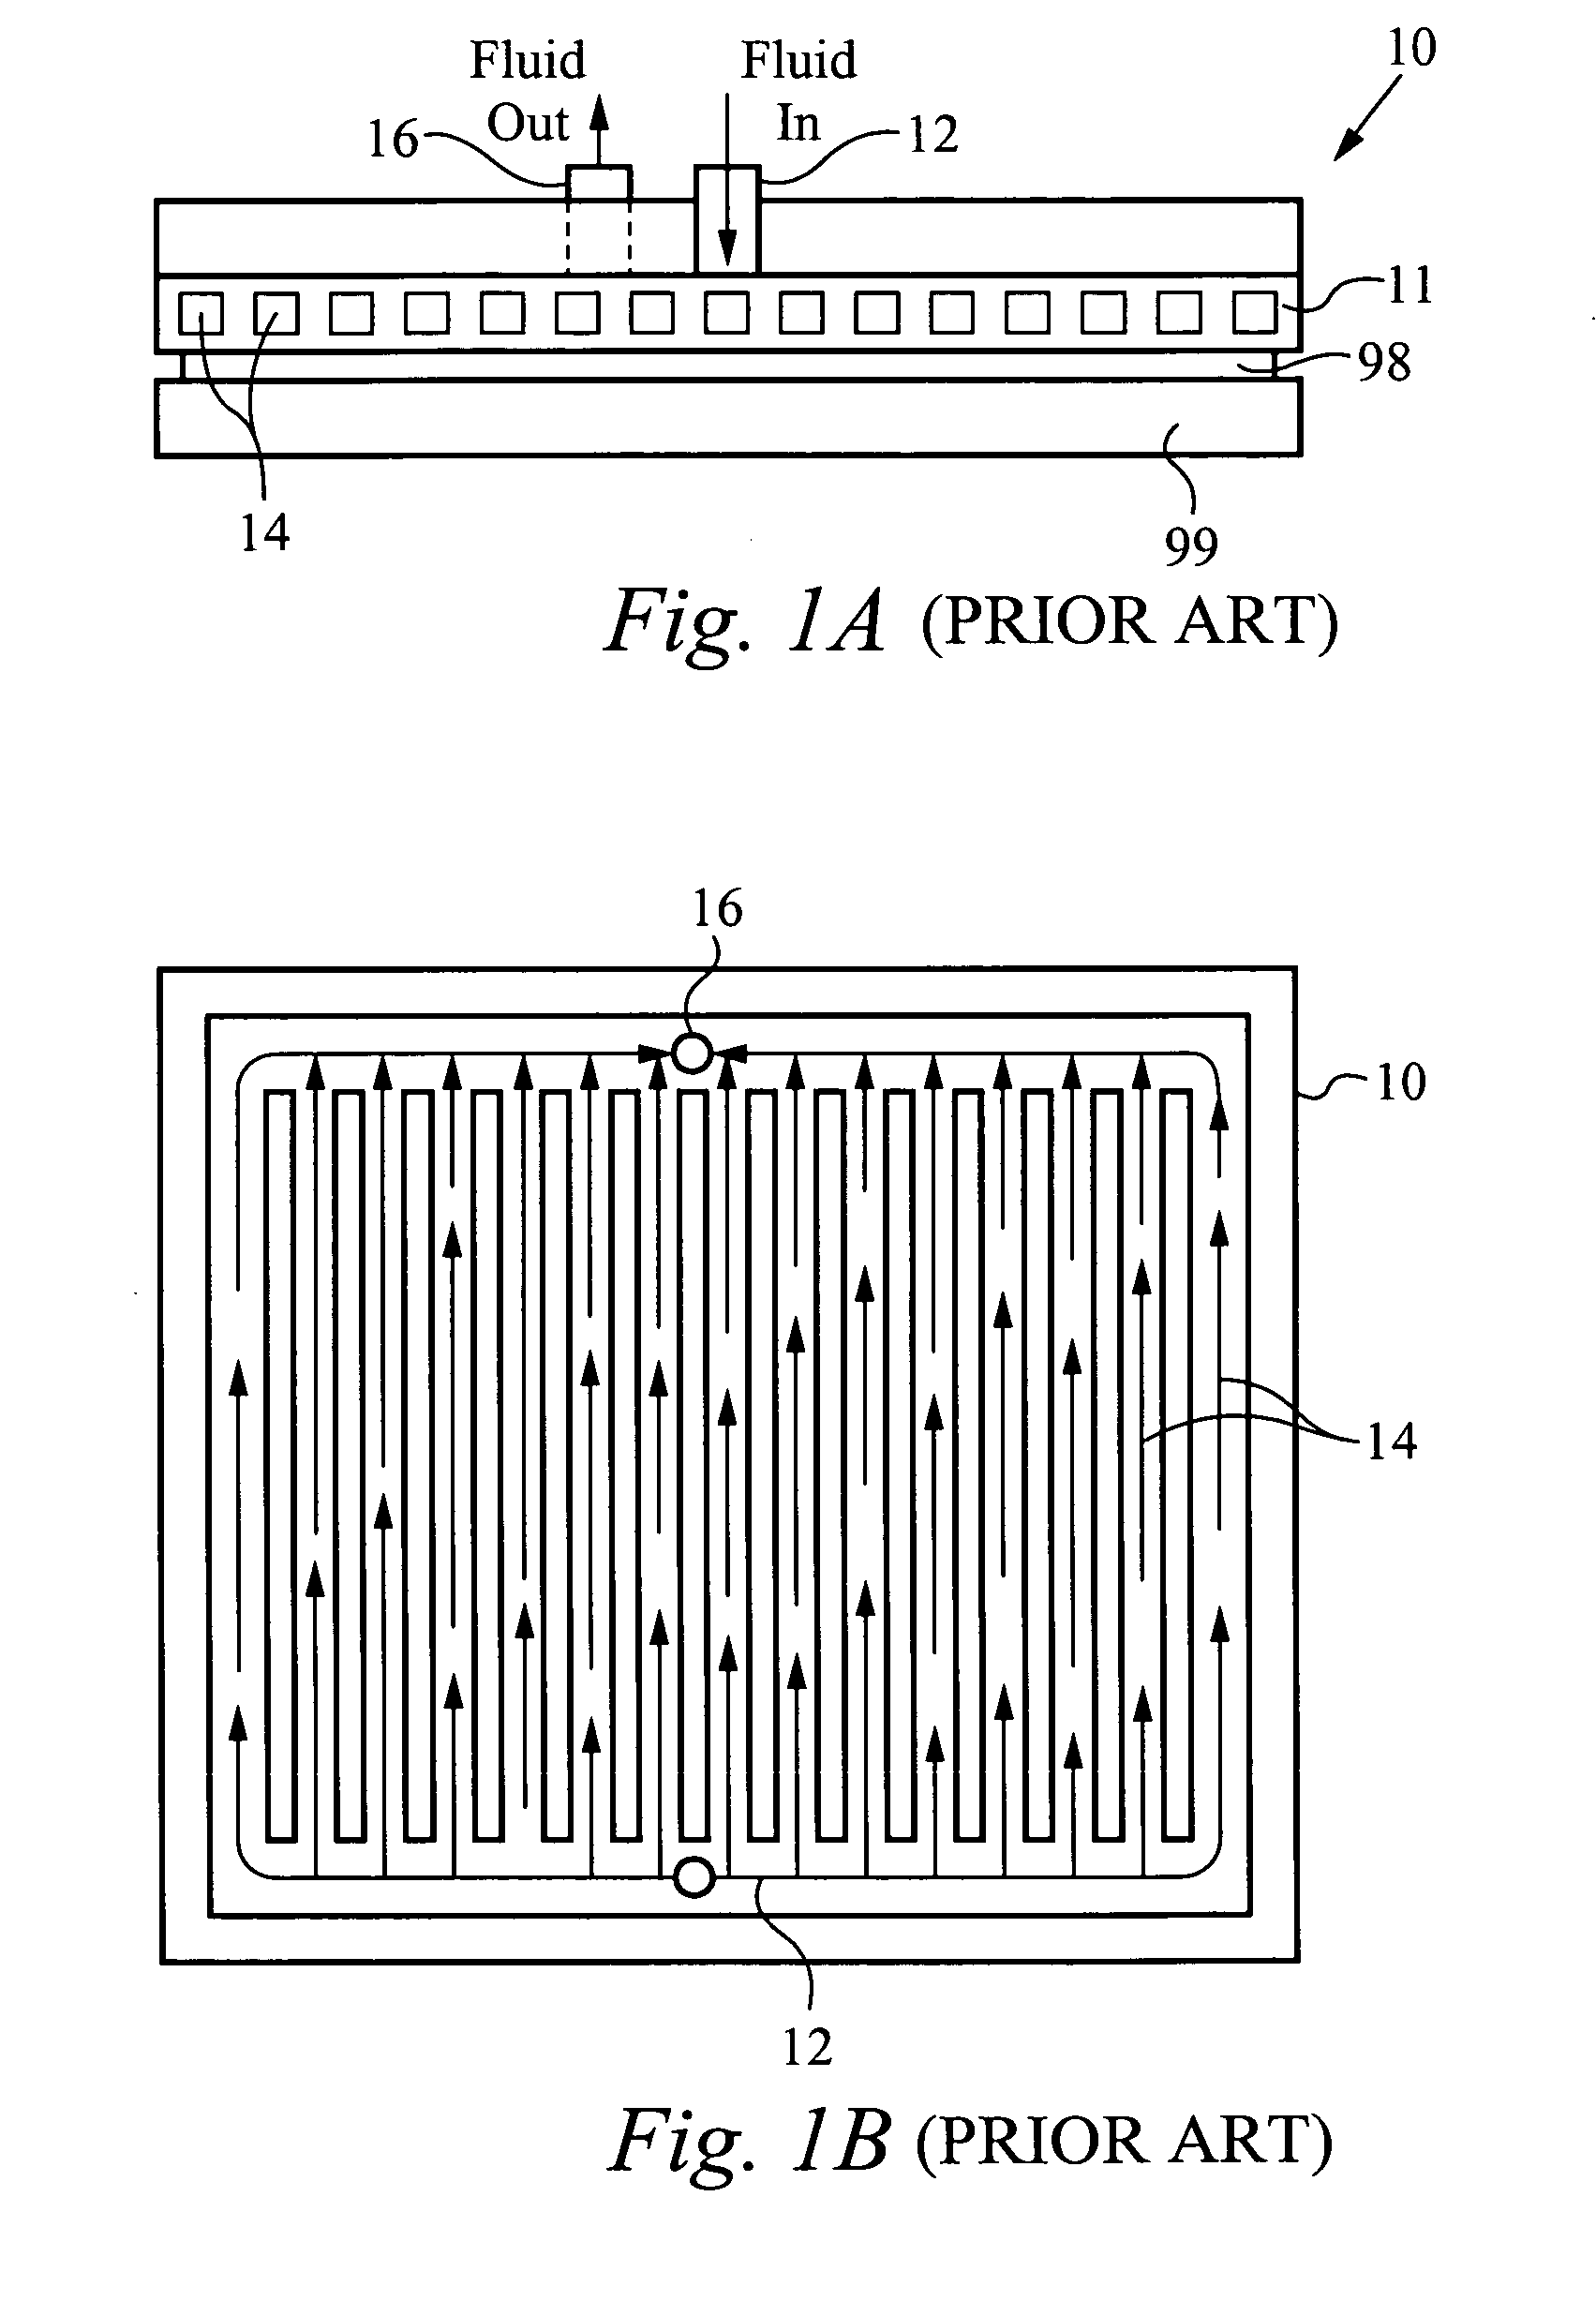 Method and apparatus for flexible fluid delivery for cooling desired hot spots in a heat producing device